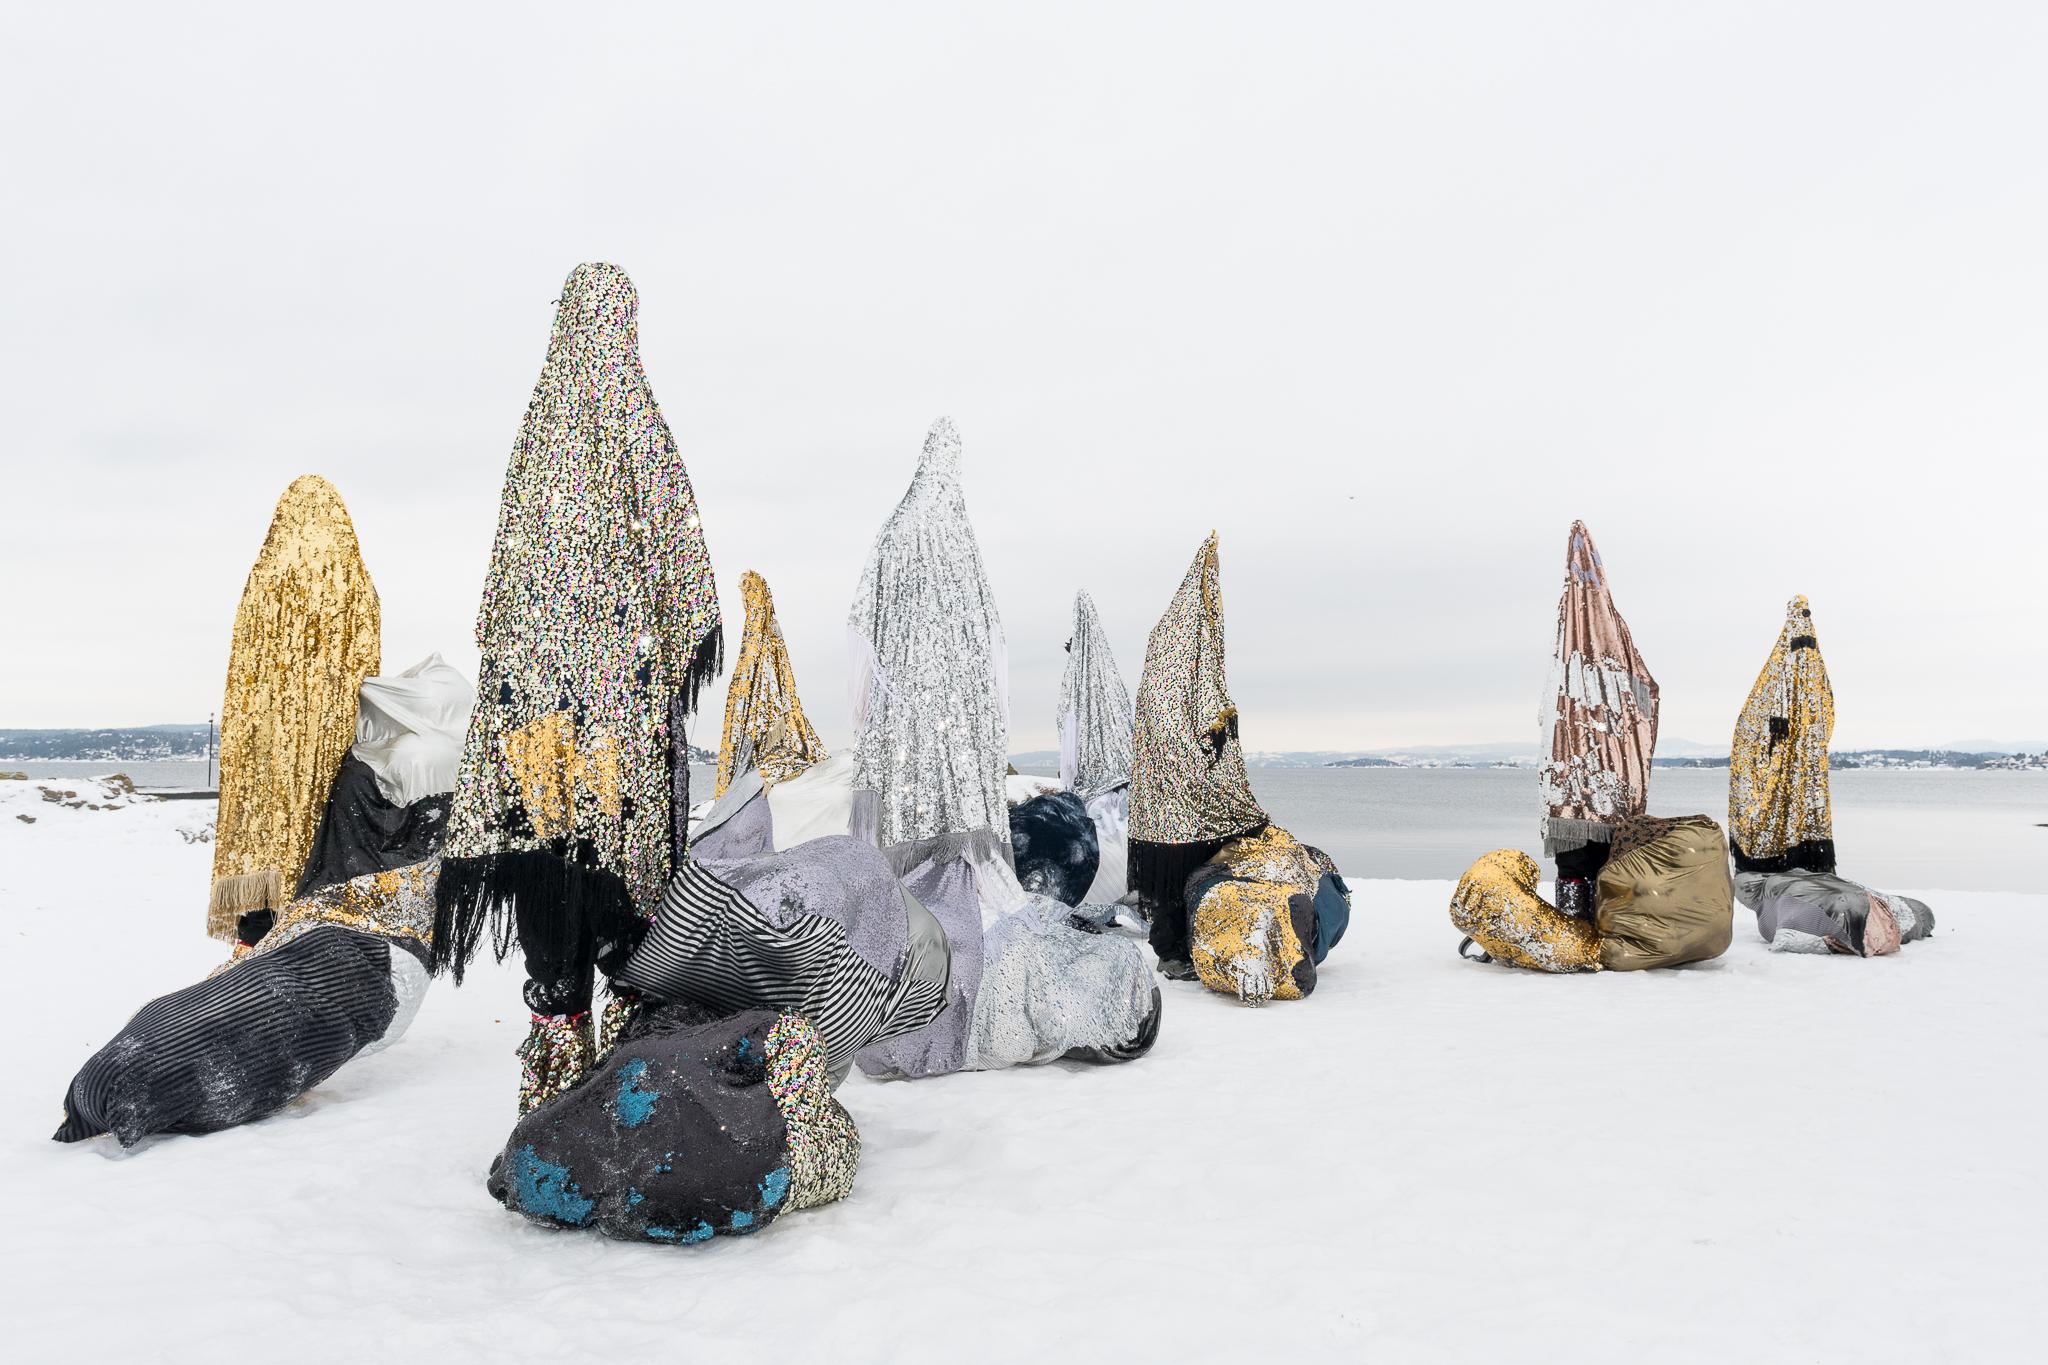 Figures draped in sequin fabric of metallic colors stand against a snowy scene. Some of the figures have pointed tips, and bulbous shapes in similar fabric are on the ground.